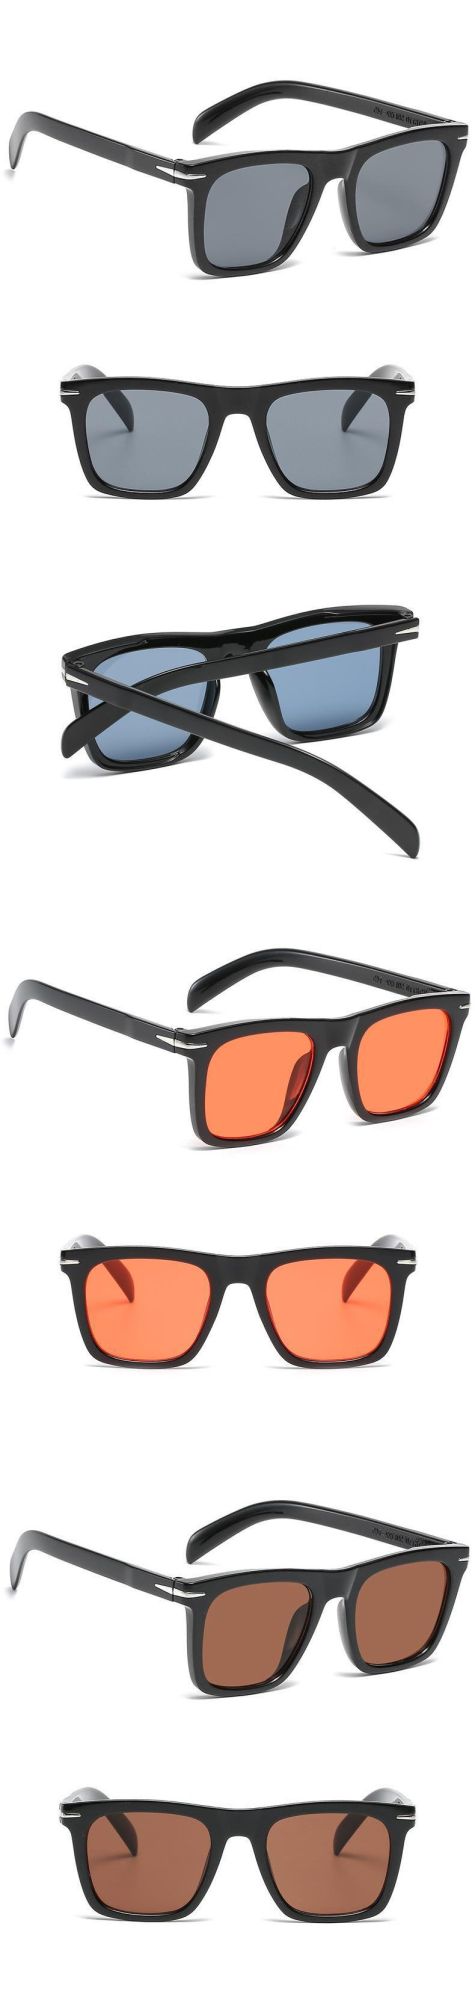 2022 Men Arrivals Hot Selling Square Frame Sun Glasses Newest Style Wholesale Colorful Fashion Trendy Sunglasses